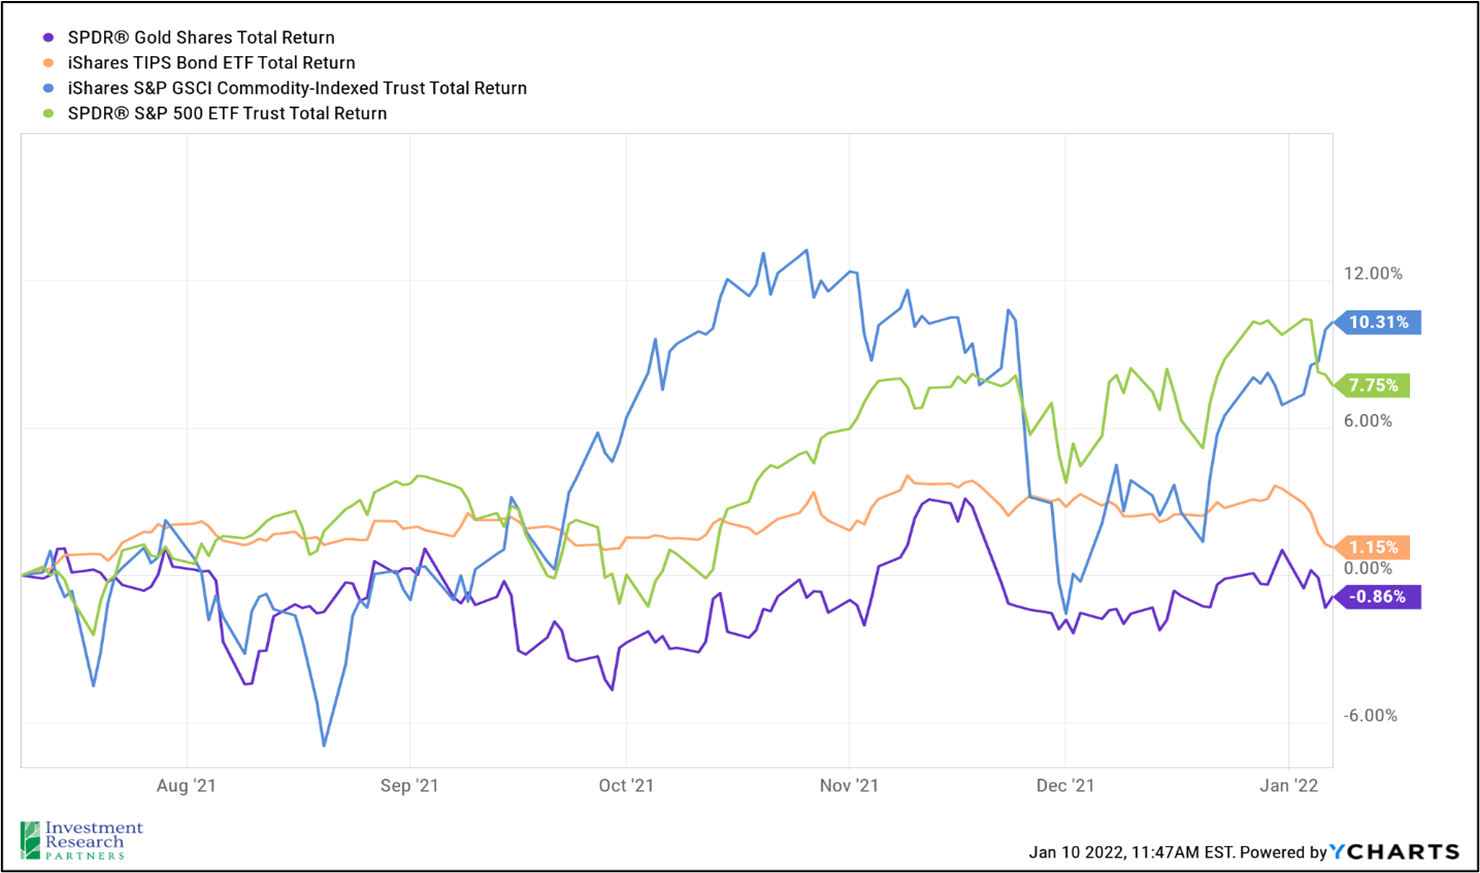 Line graph depicting SPDR® Gold Shares Total Return in purple, iShares TIPS Bond ETF Total Return in orange, iShares S&P GSCI Commodity-Indexed Trust Total Return in blue, and SDPR® S&P 500 ETF Trust Total Return in green from since August 2021